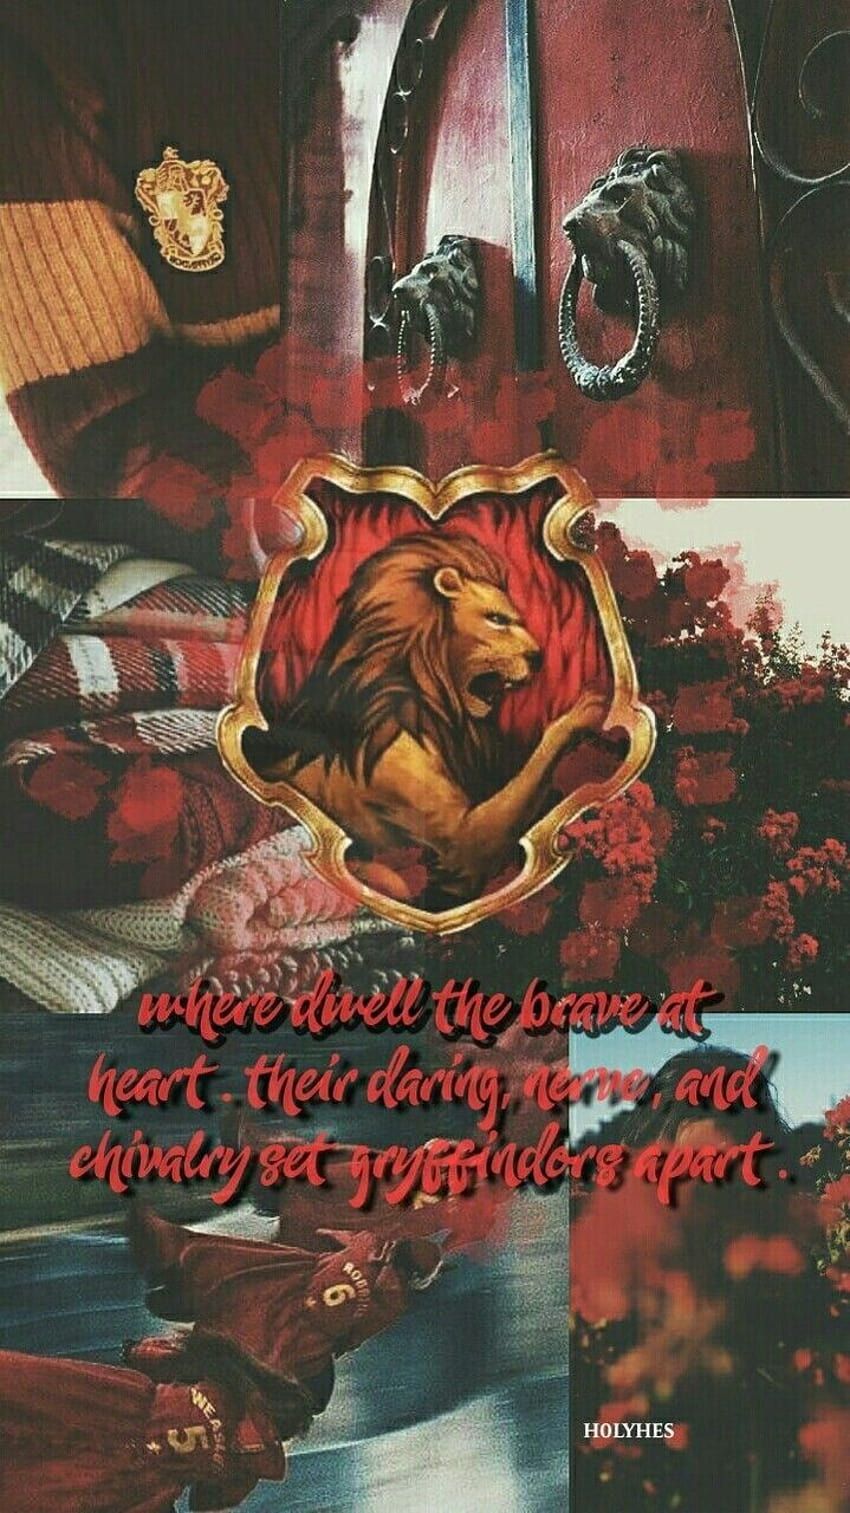 Aesthetic of Gryffindor house from Harry Potter - Gryffindor